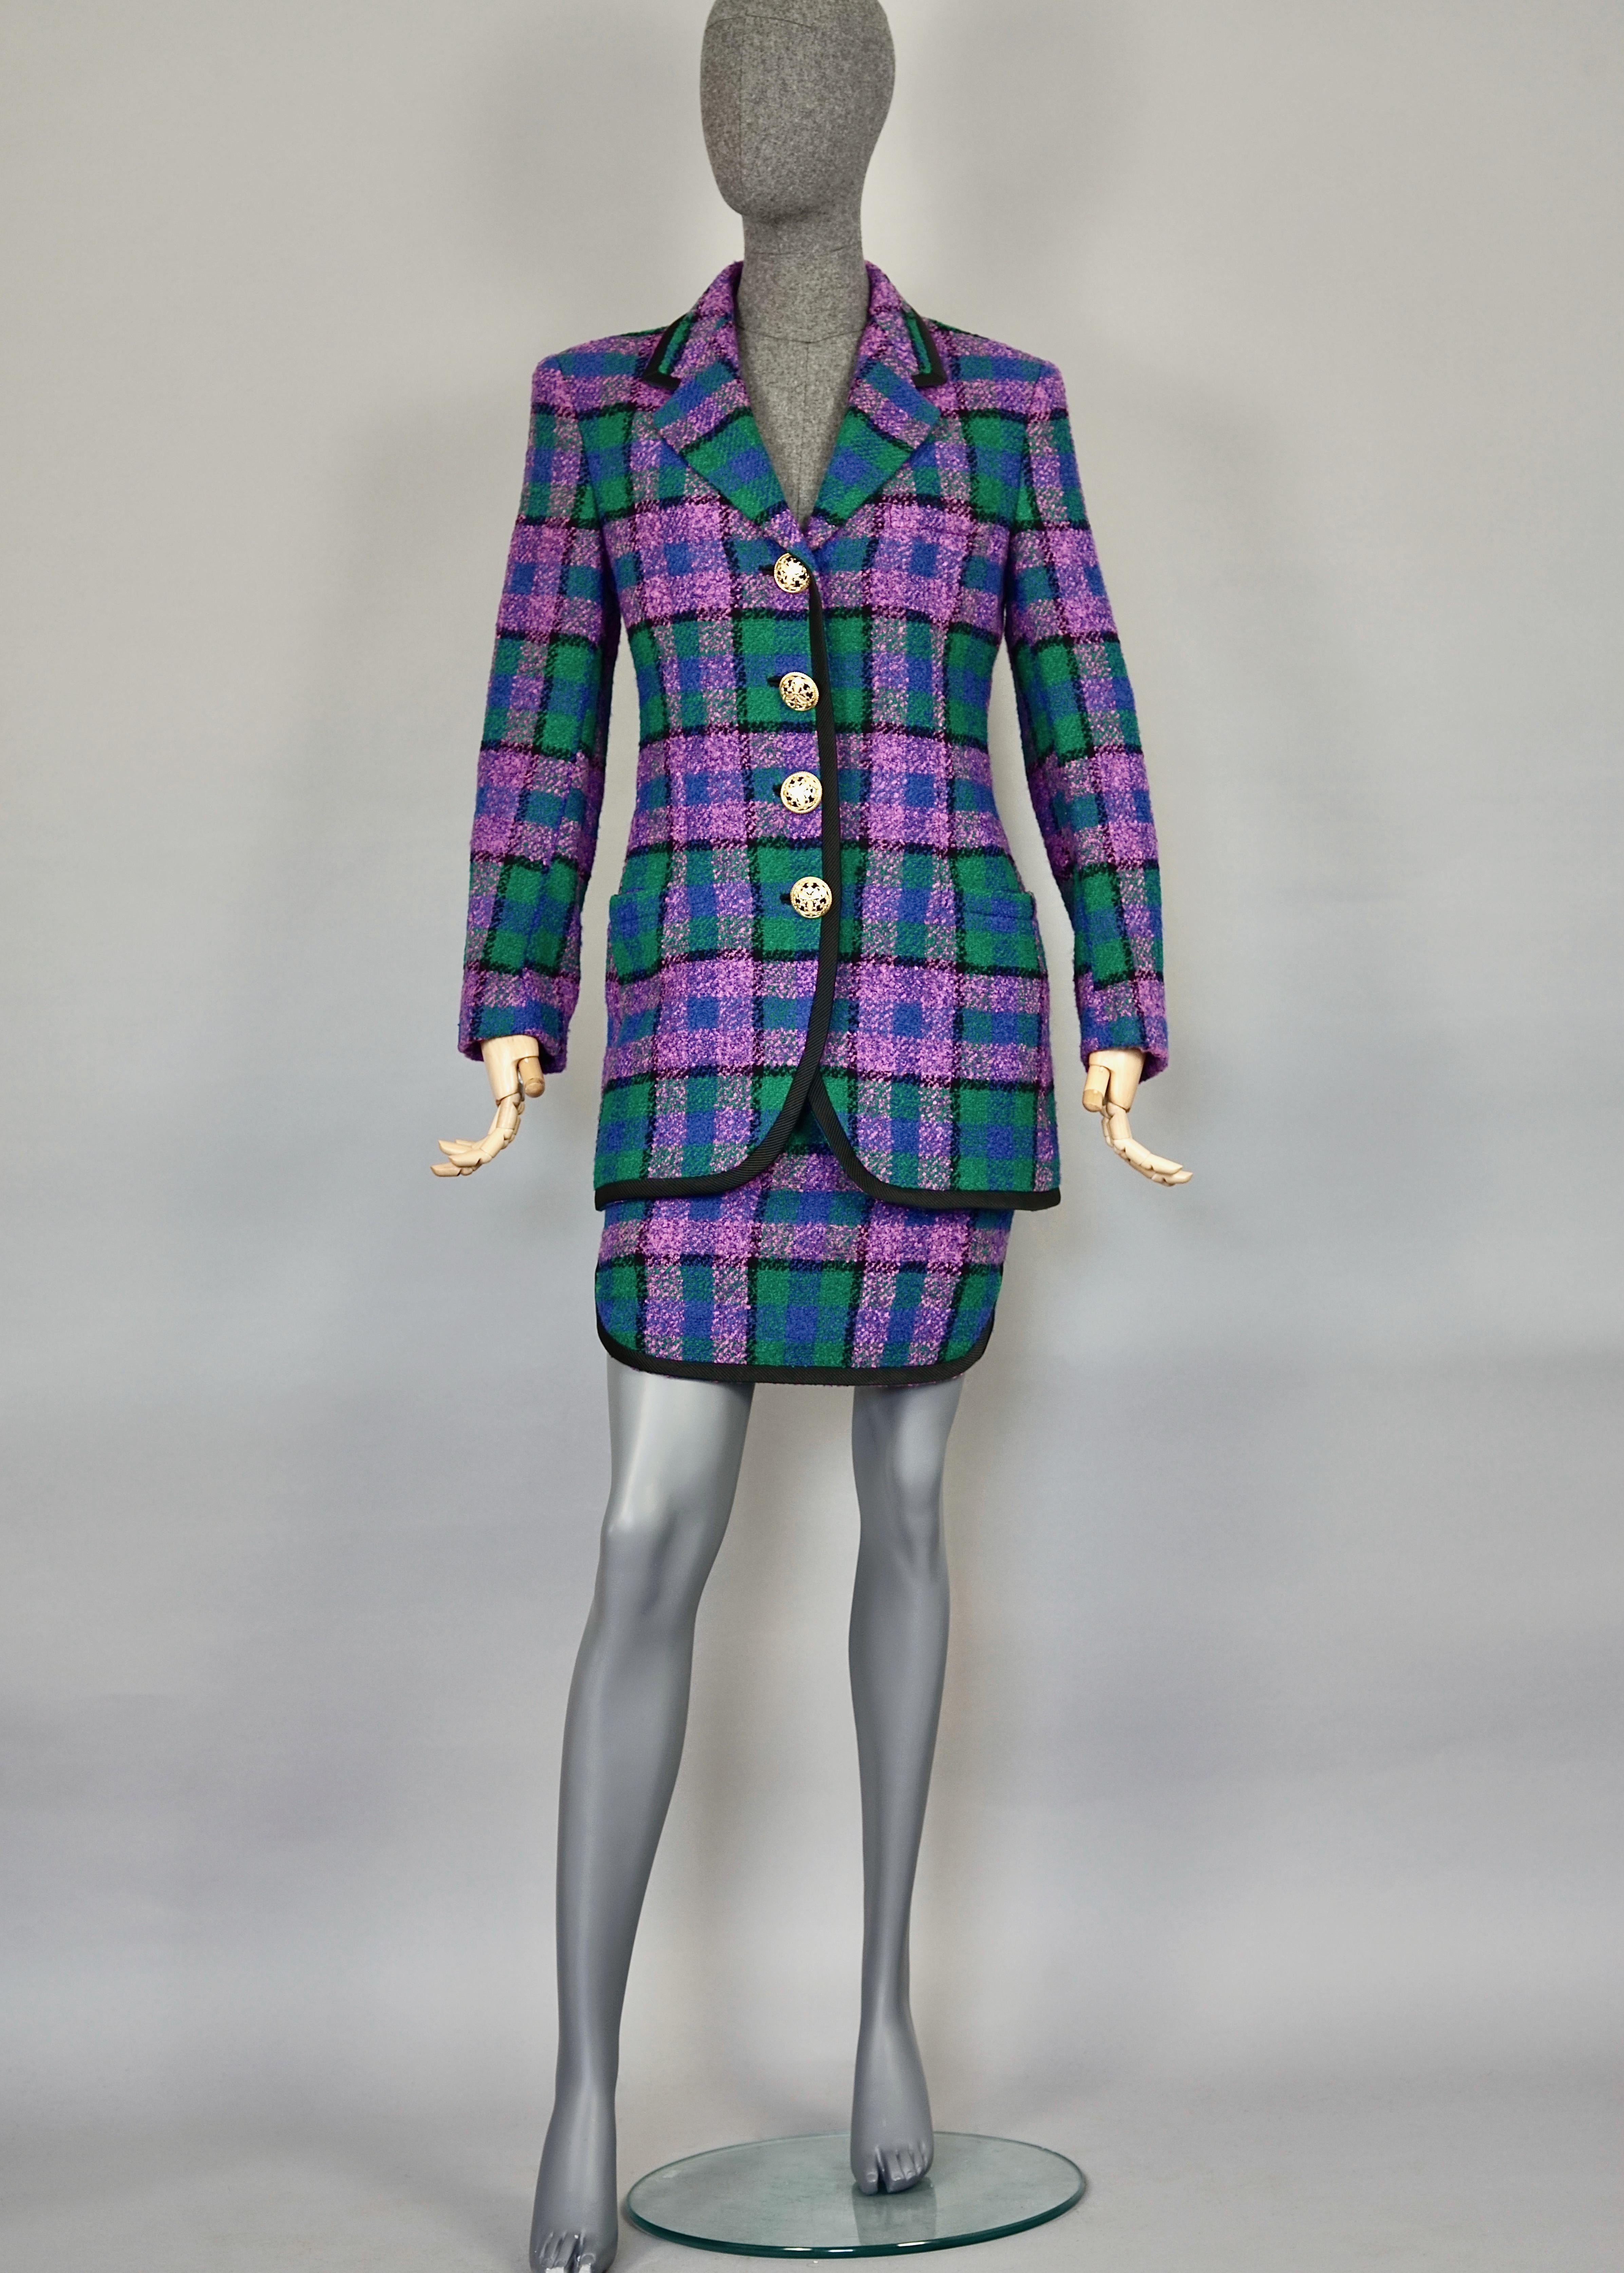 Vintage 1991 A/W GIANNI VERSACE Couture Plaid Tartan Jacket Skirt Suit

Measurements taken laid flat, please double bust, waist, hips and hems:
JACKET
Shoulder: 15.35 inches (39 cm)
Sleeves: 23.22 inches (59 cm)
Bust: 17.71 inches (45 cm)
Waist: